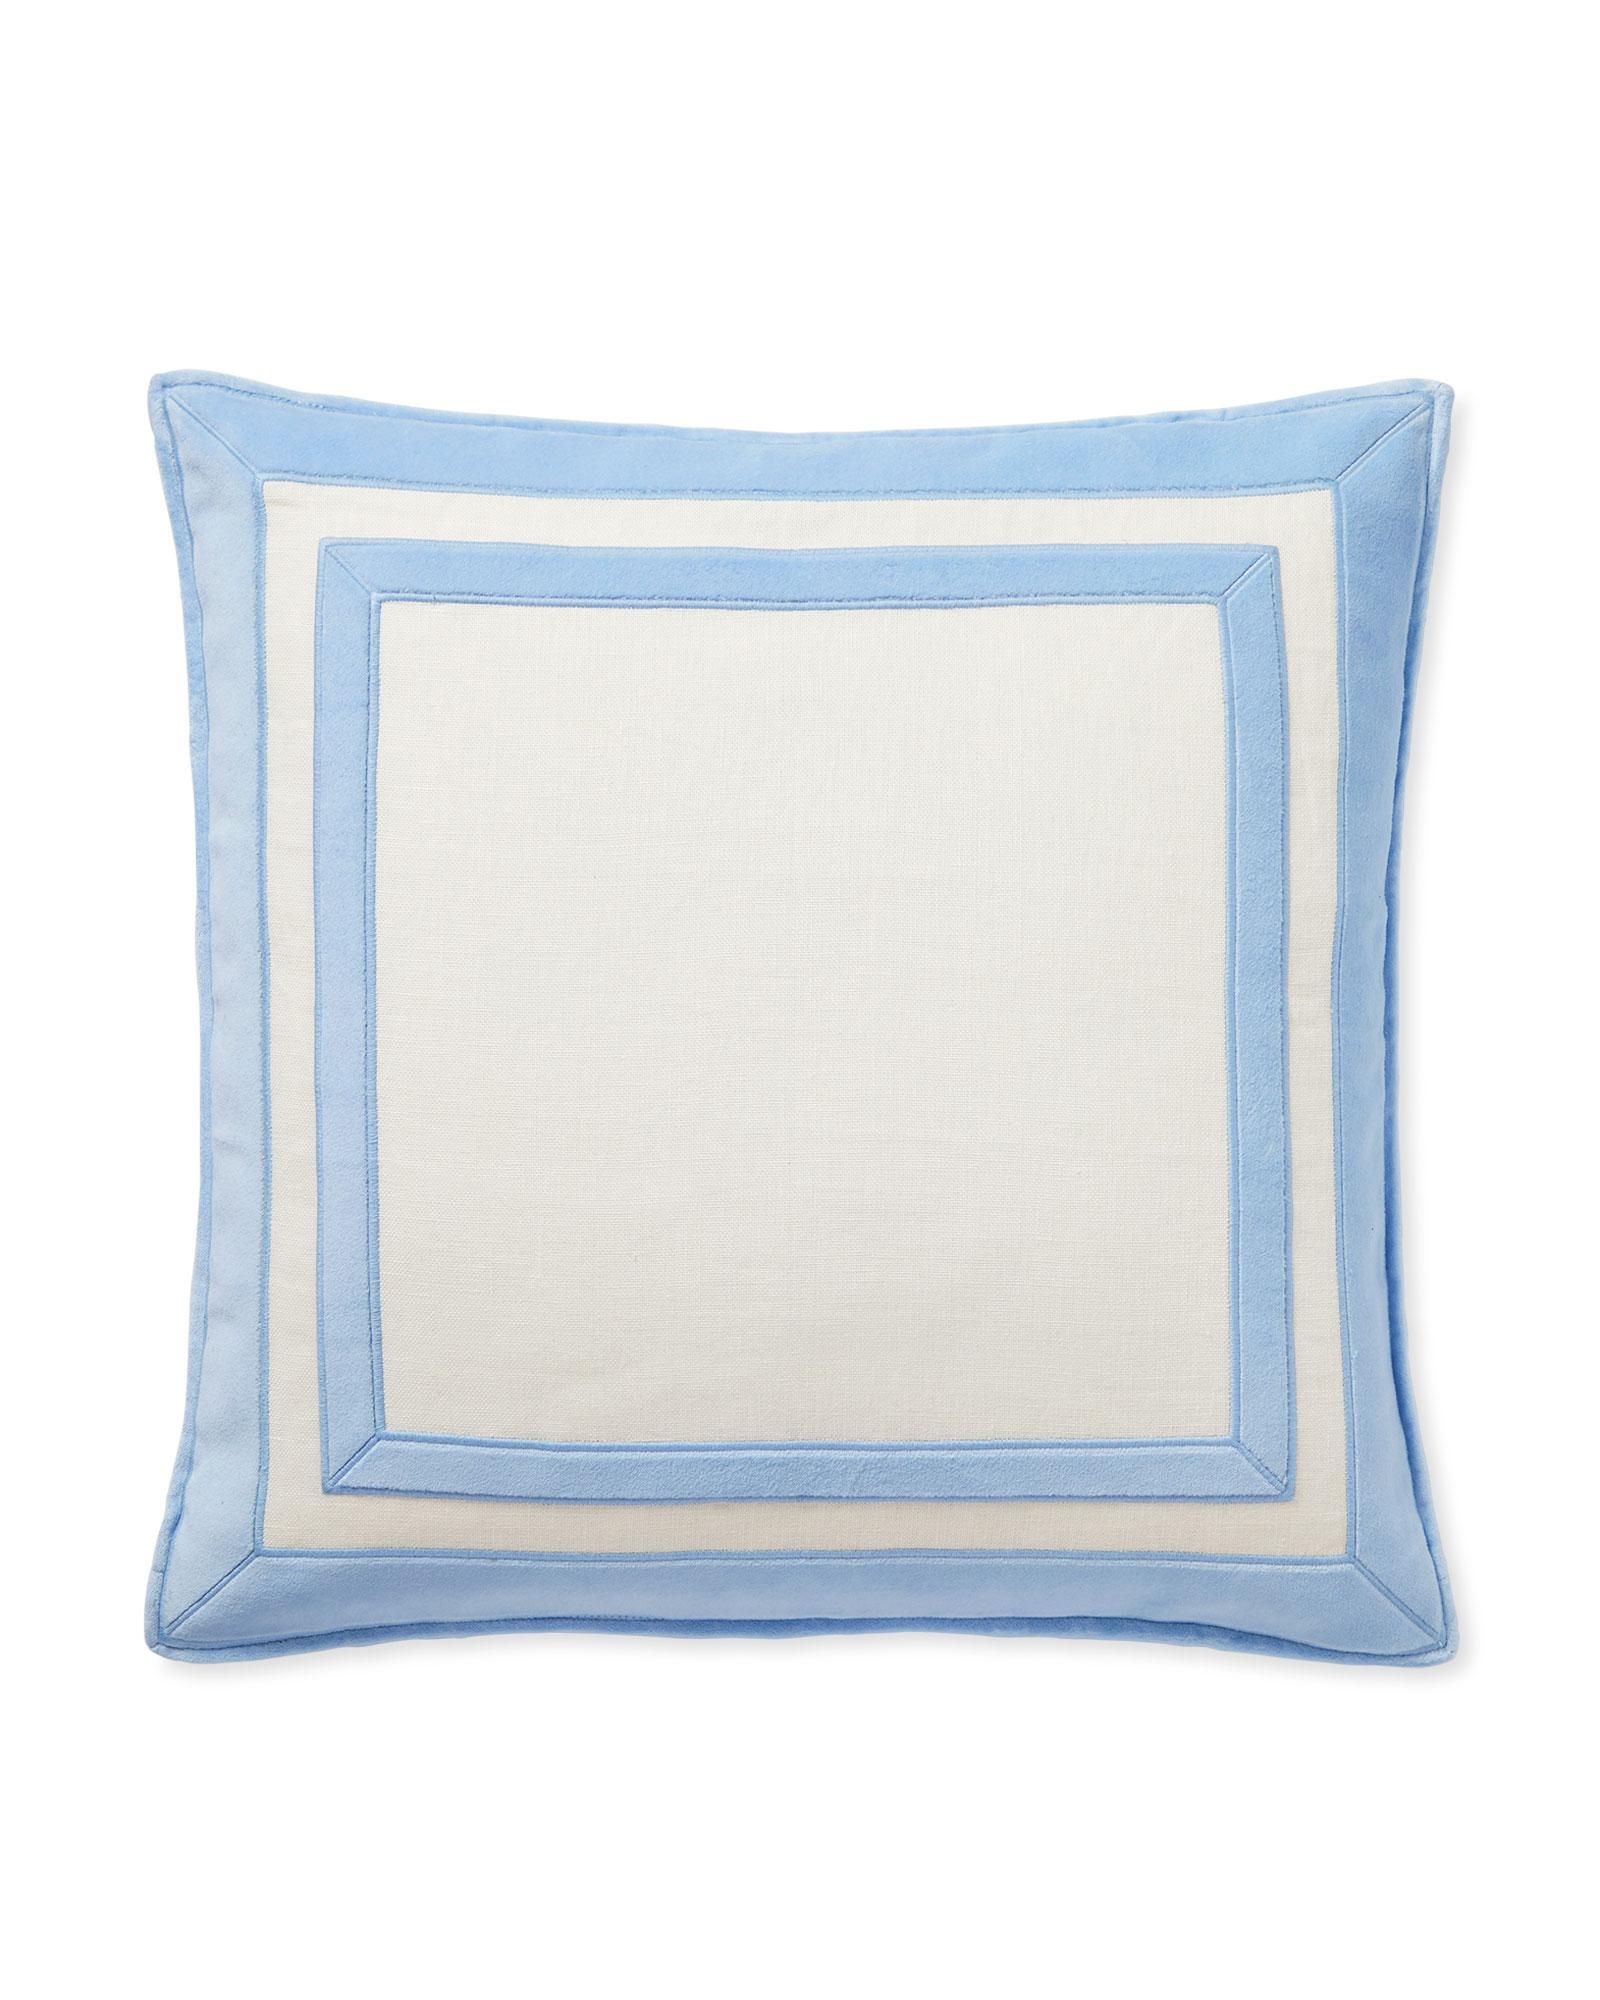 Waverly Pillow Cover | Serena and Lily